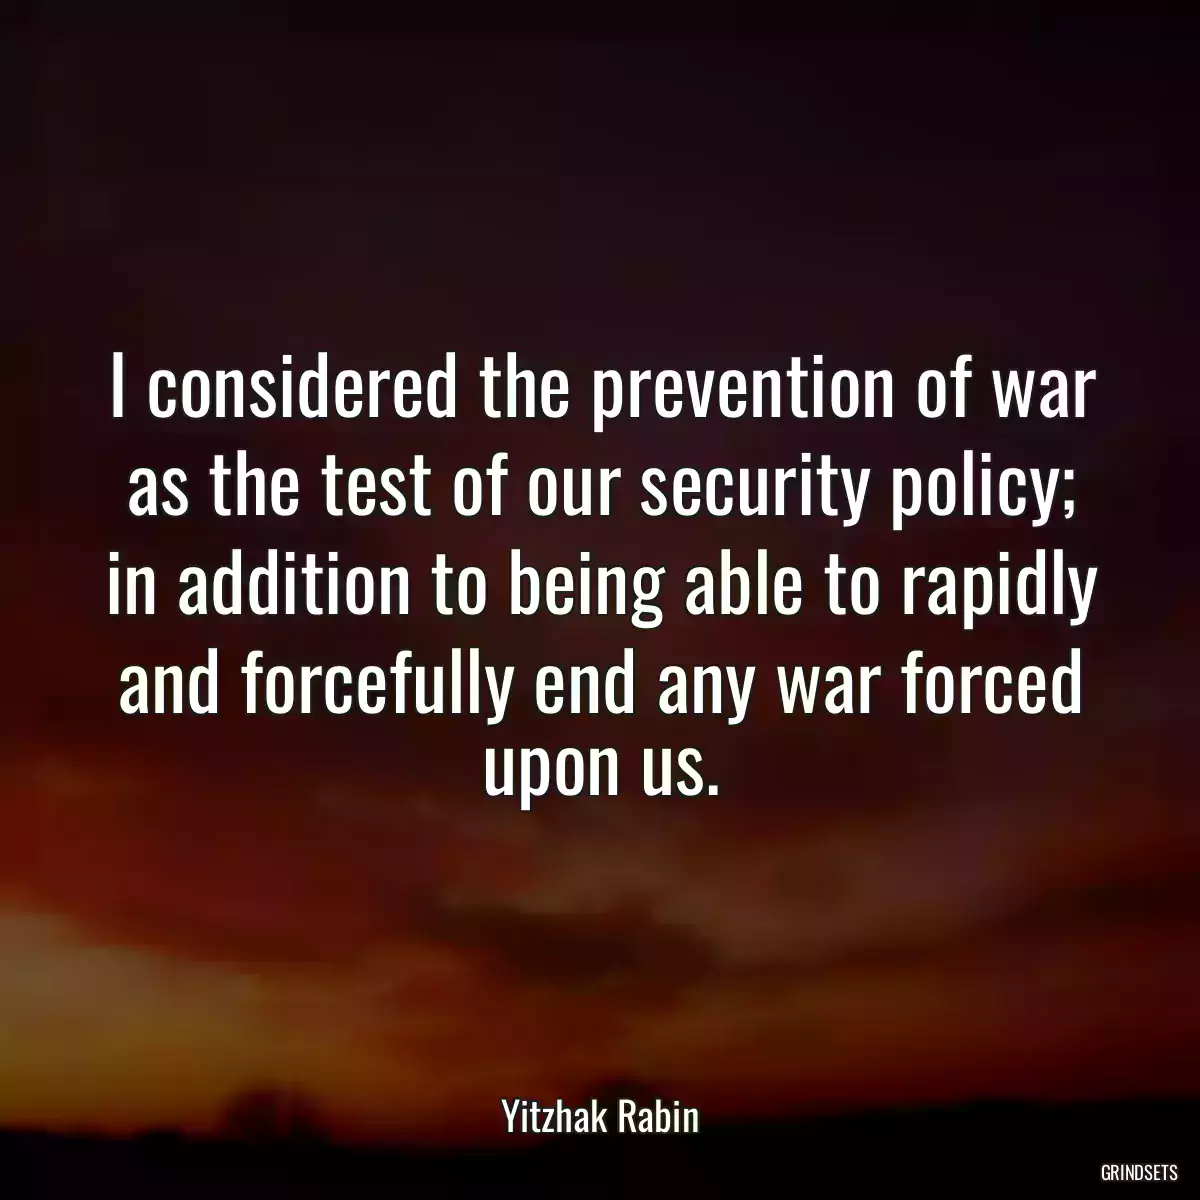 I considered the prevention of war as the test of our security policy; in addition to being able to rapidly and forcefully end any war forced upon us.